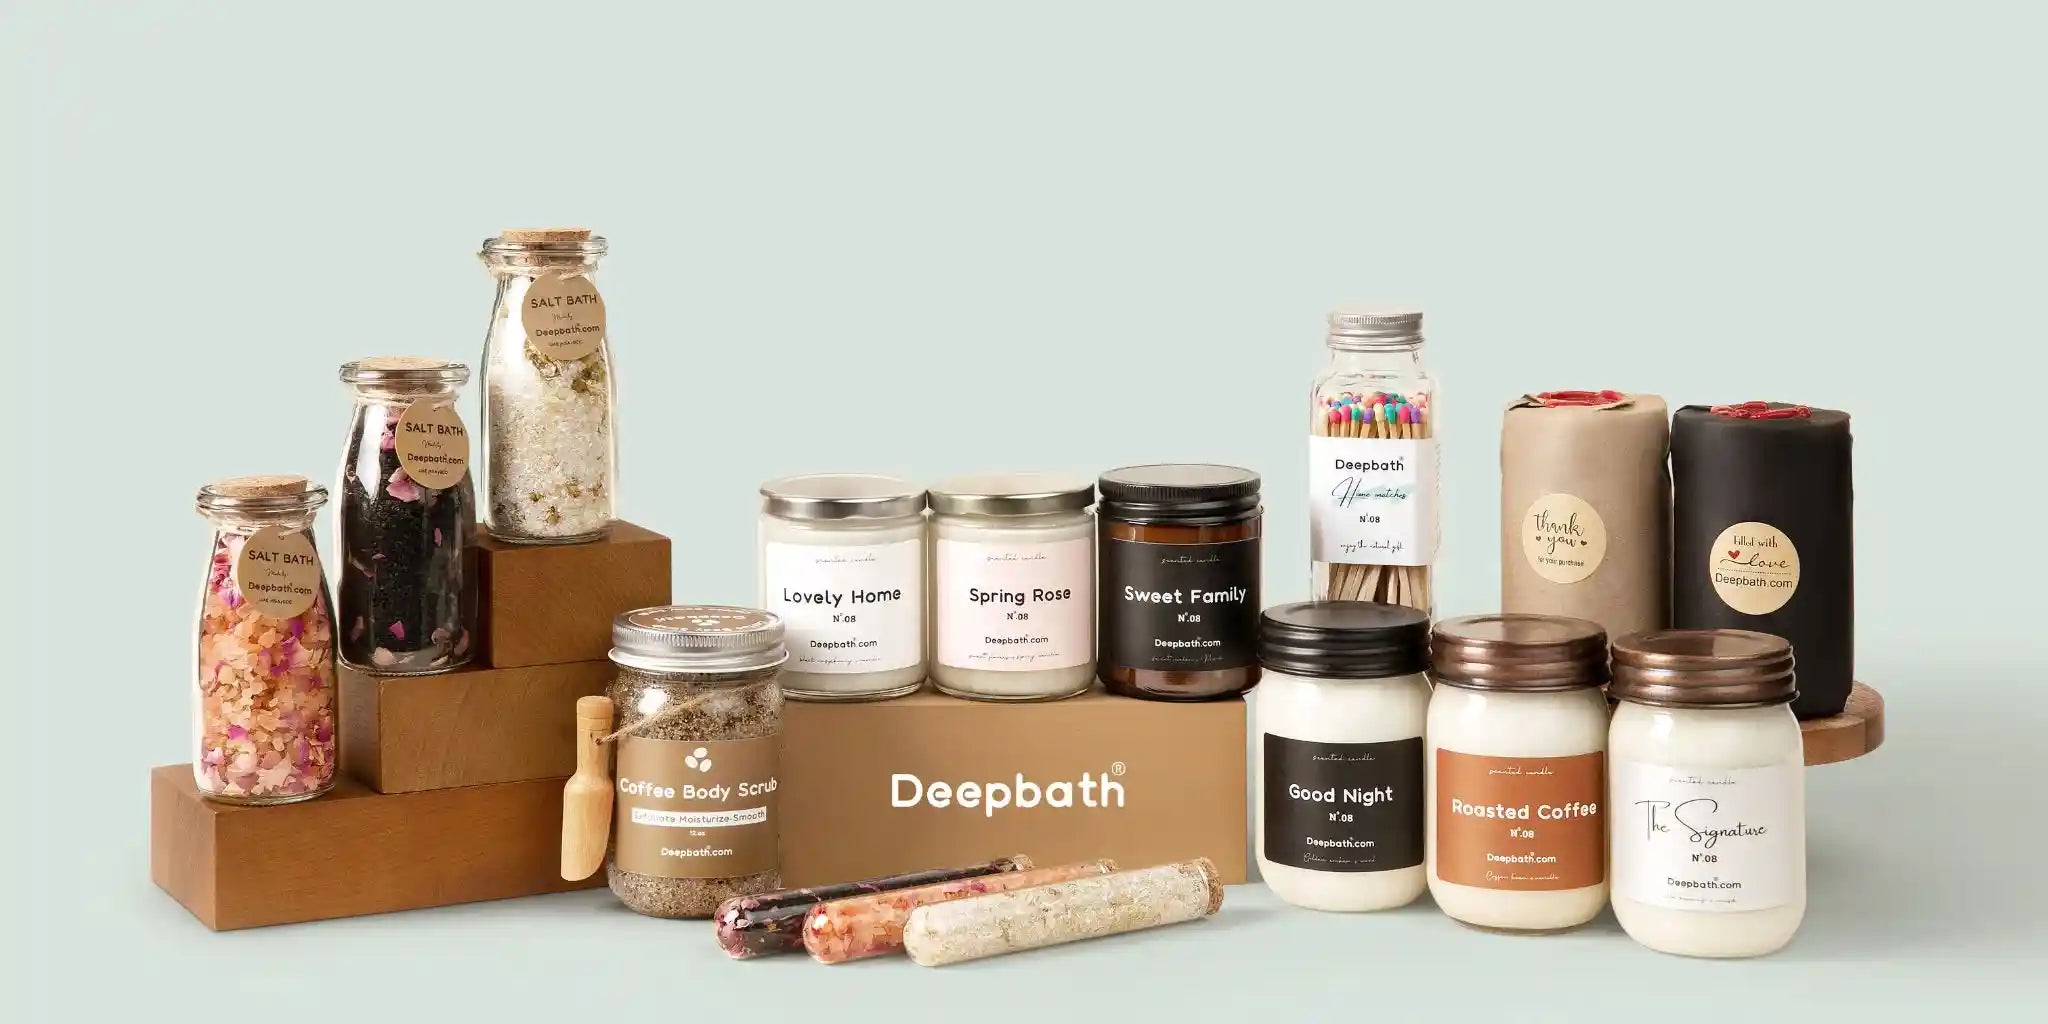 Deepbath All Products - Wide selection of Korean beauty products, scented candles, skincare, makeup, and more